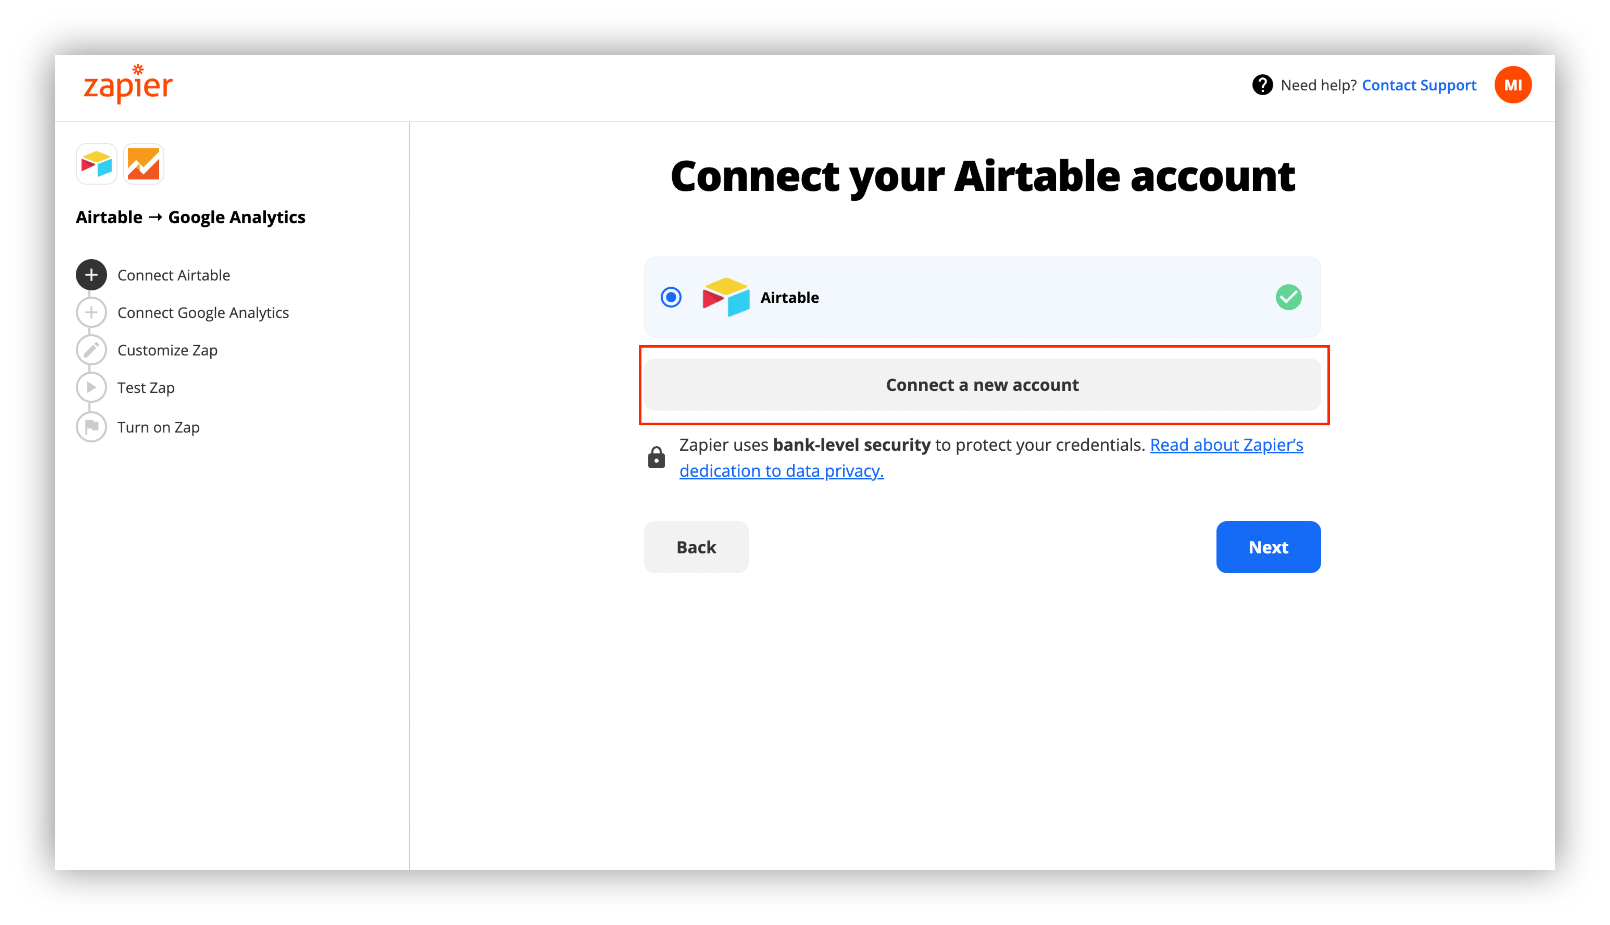 connect your Airtable account